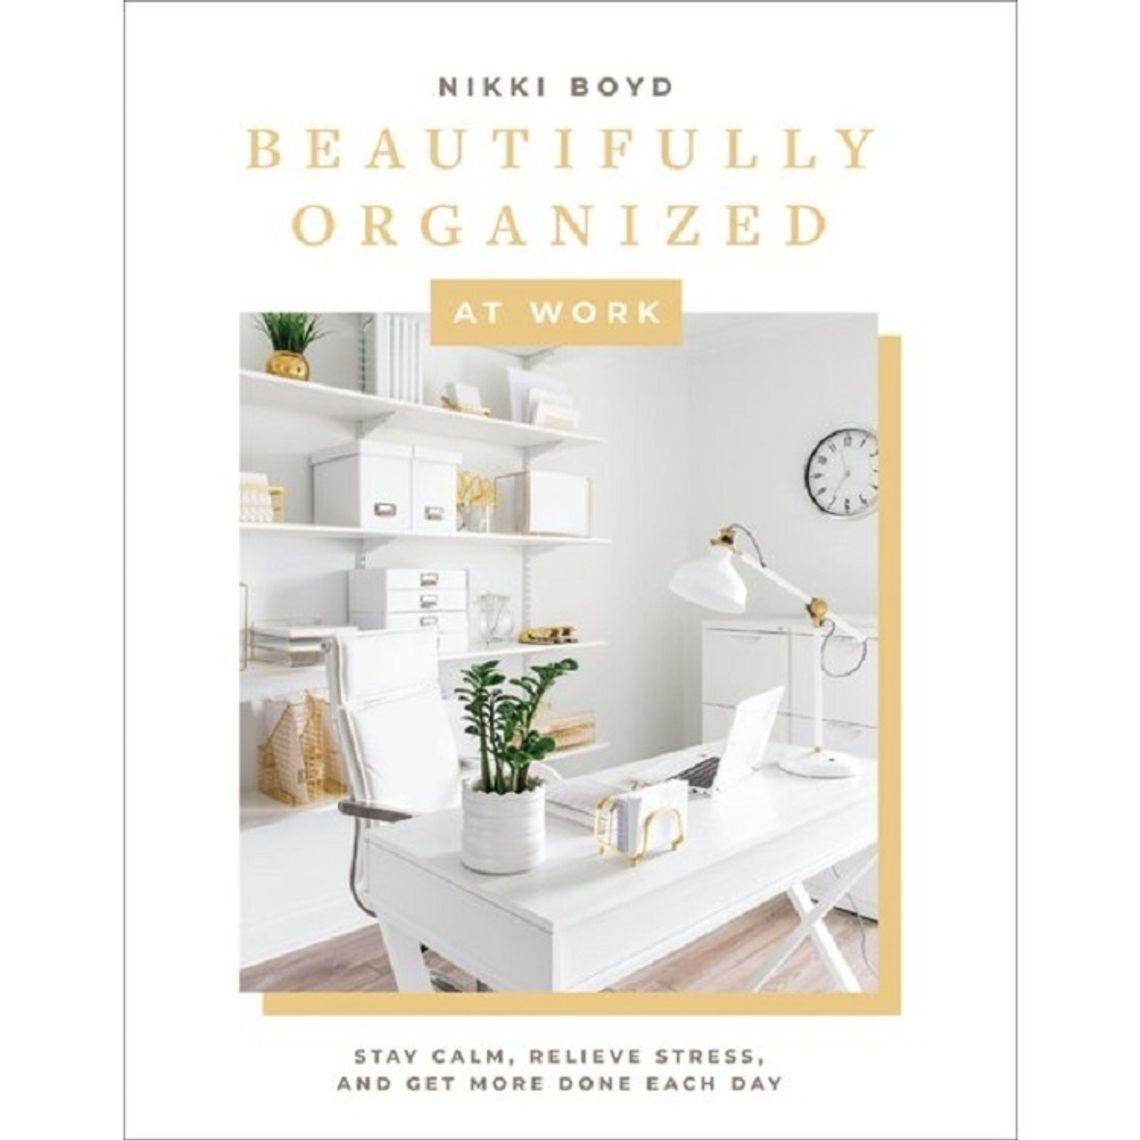 Book Review -- Beautifully Organized at Work by Nikki Boyd